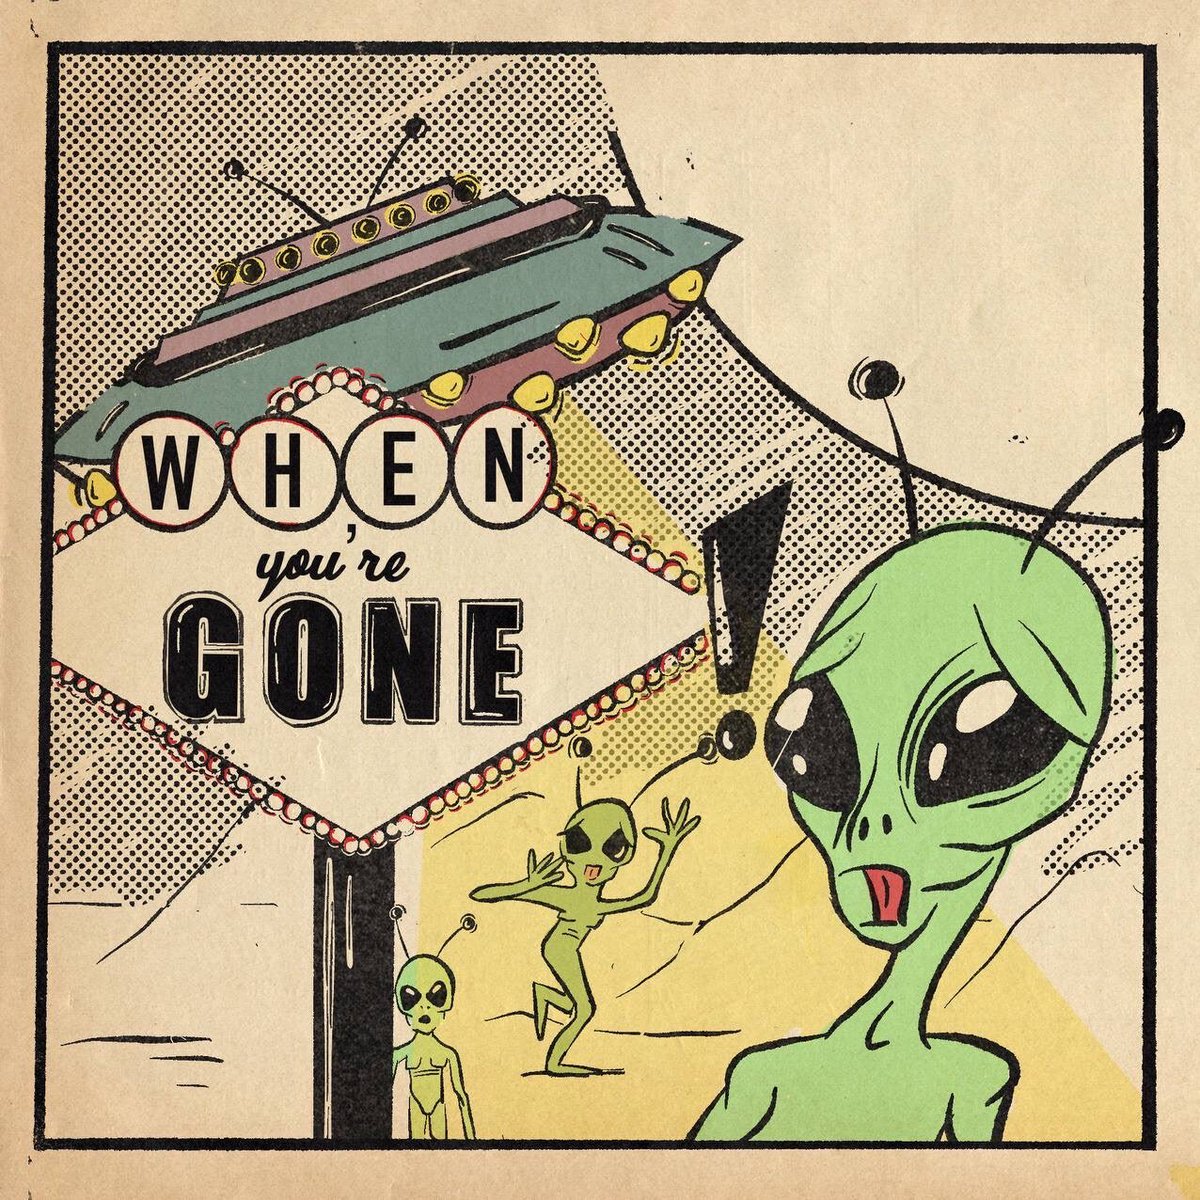 Hello X friends, last time we were here it was Twitter👽 welcome to February, we present the 3rd single off our debut EP ‘When You’re Gone’ out February 14th🛸 pre-save it now! distrokid.com/hyperfollow/ro…